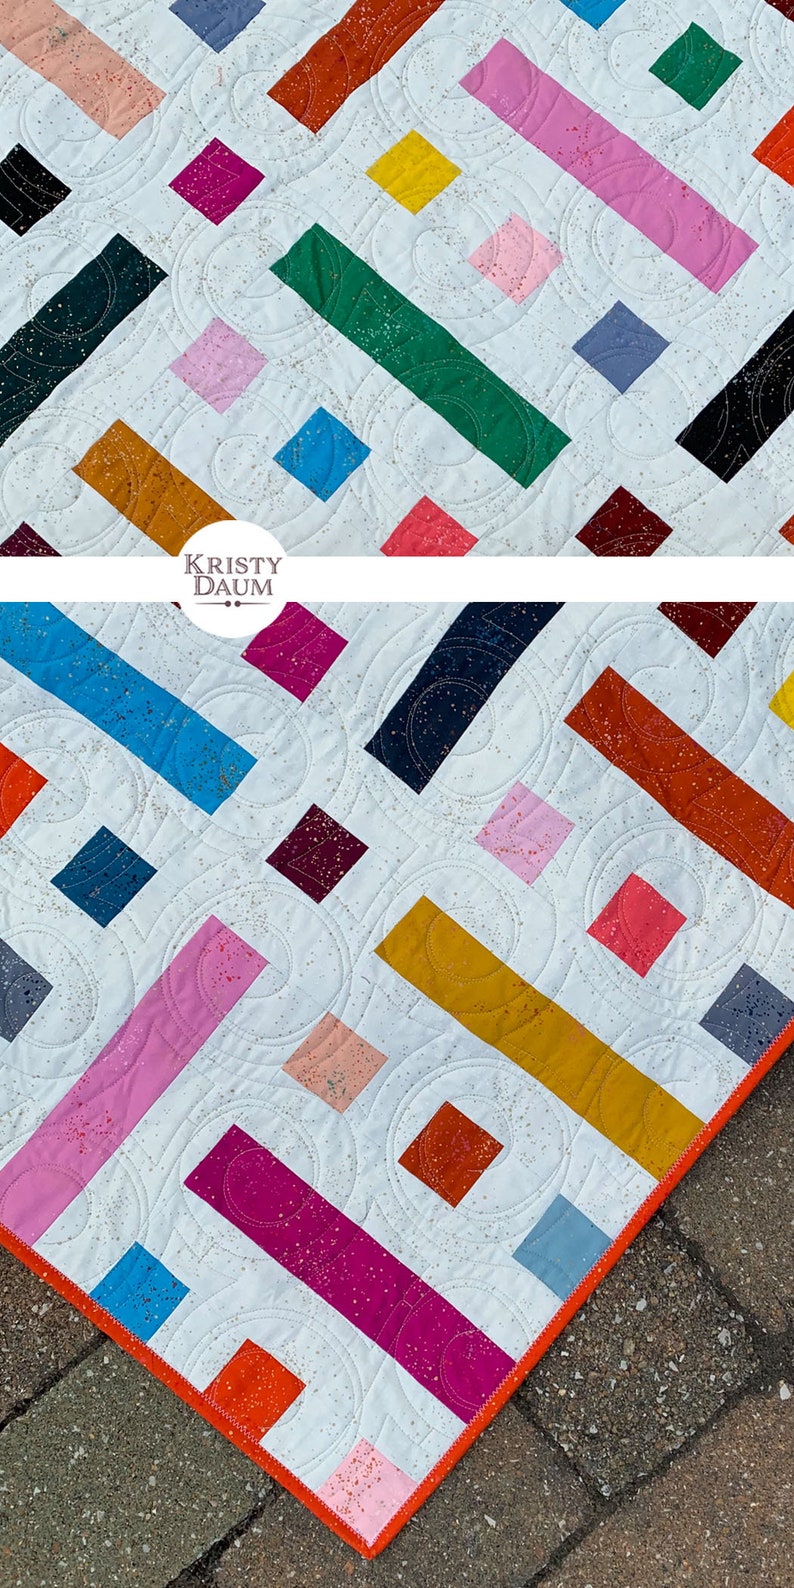 modern quilt made up of colorful squares and rectangles titled floorplan